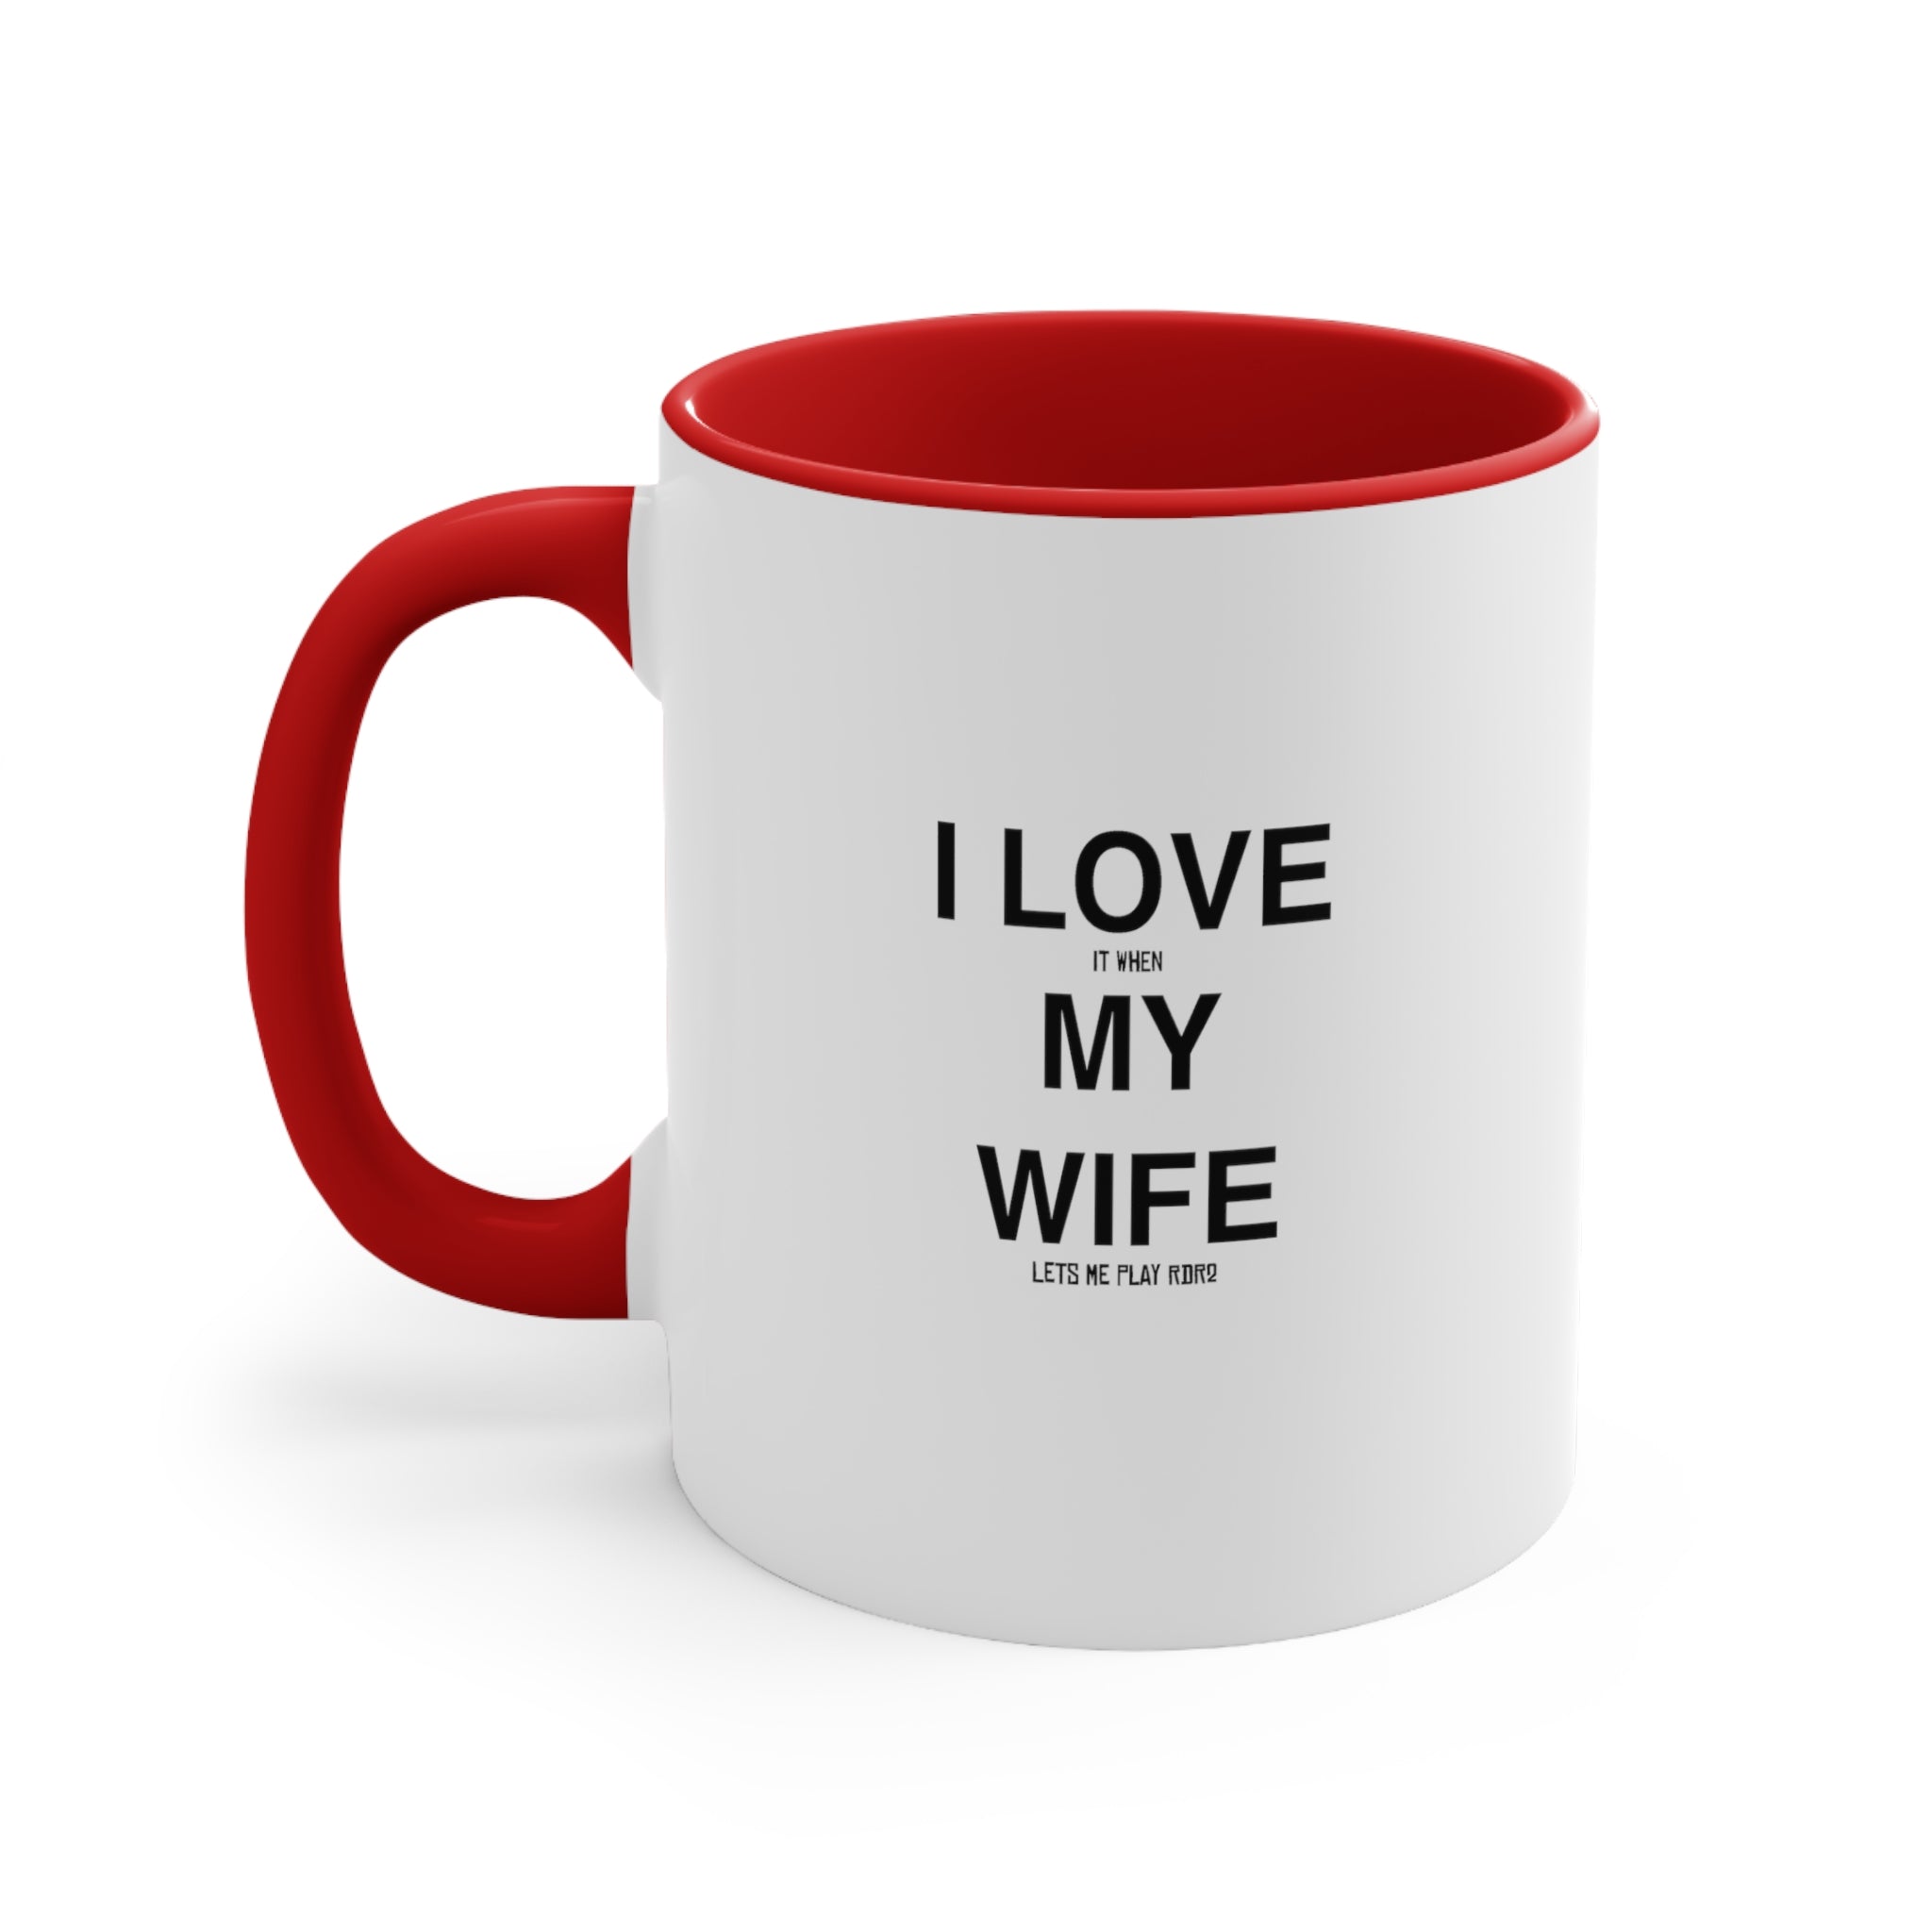 RDR2 Red Dead Redemption 2 Funny Coffee Mug, 11oz Gift For Him Gift For Her Birthday Christmas Valentine Gift Cup